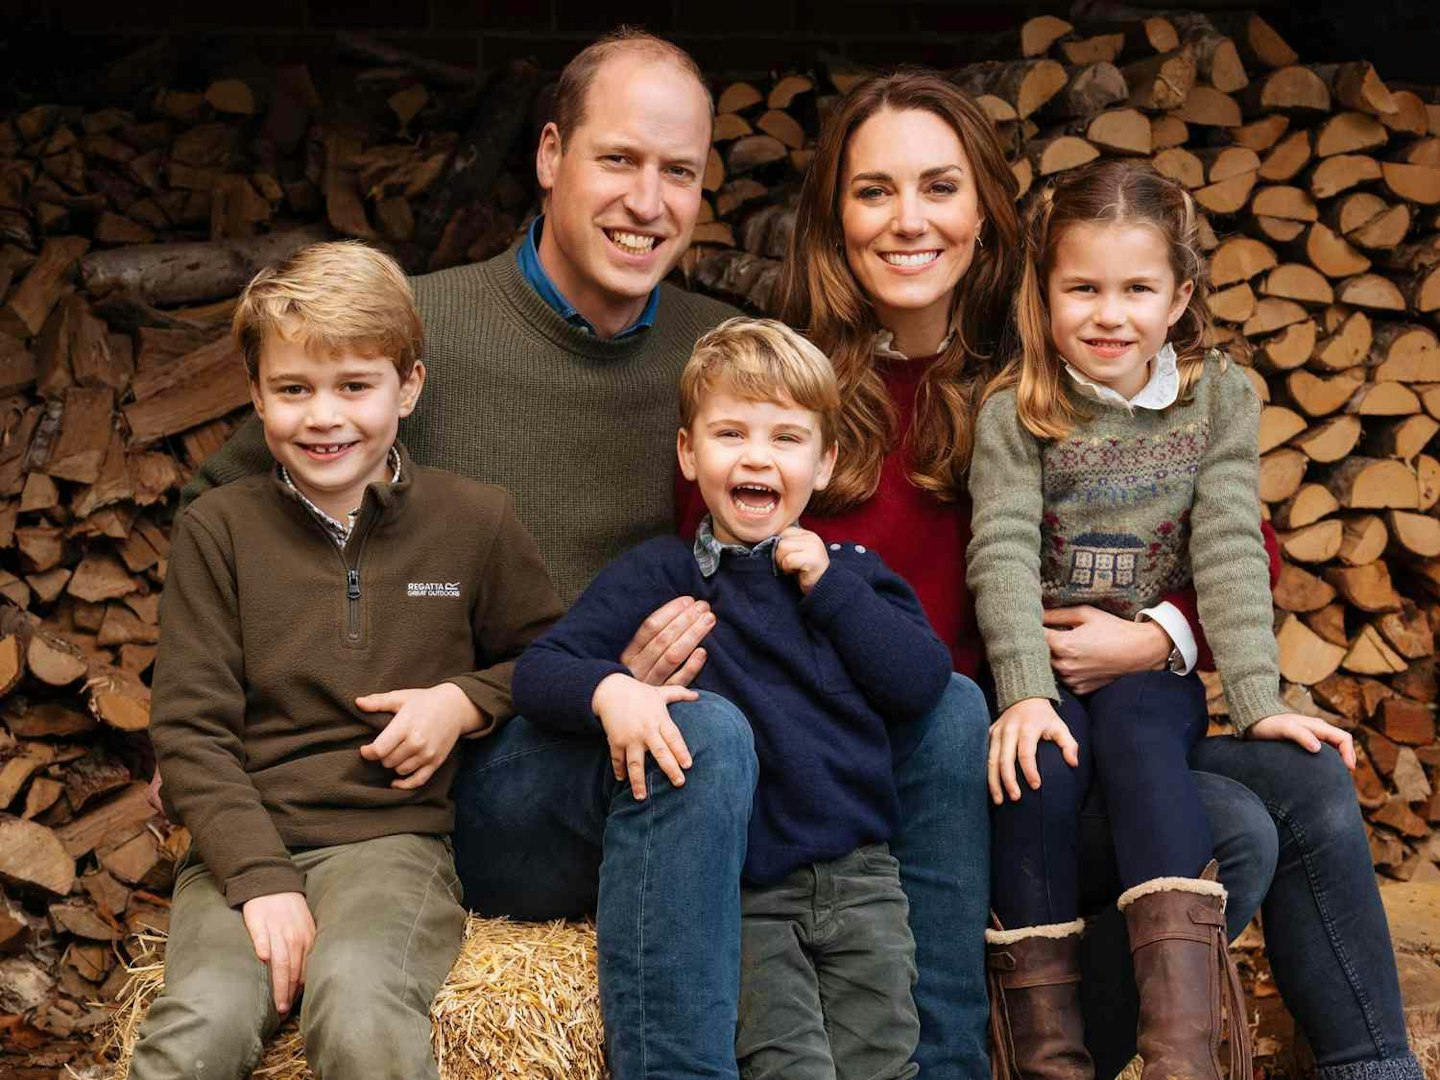 Prince William is first in the royal line of succession